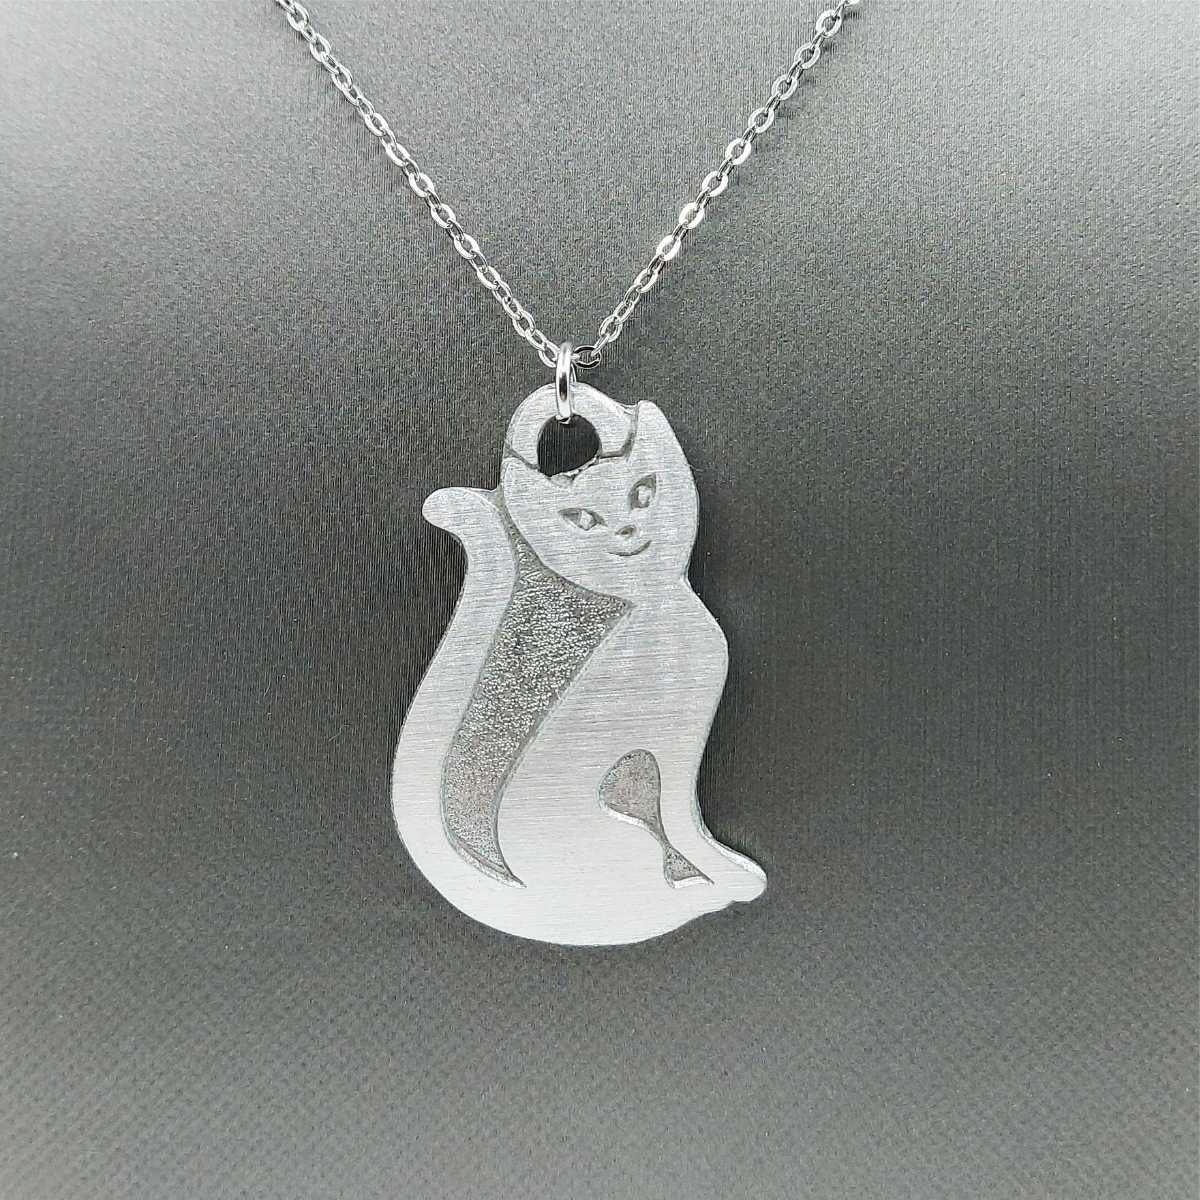 Celestial Cat Necklace, Cat In Moon Necklace Catching a Star – SilverfireUK